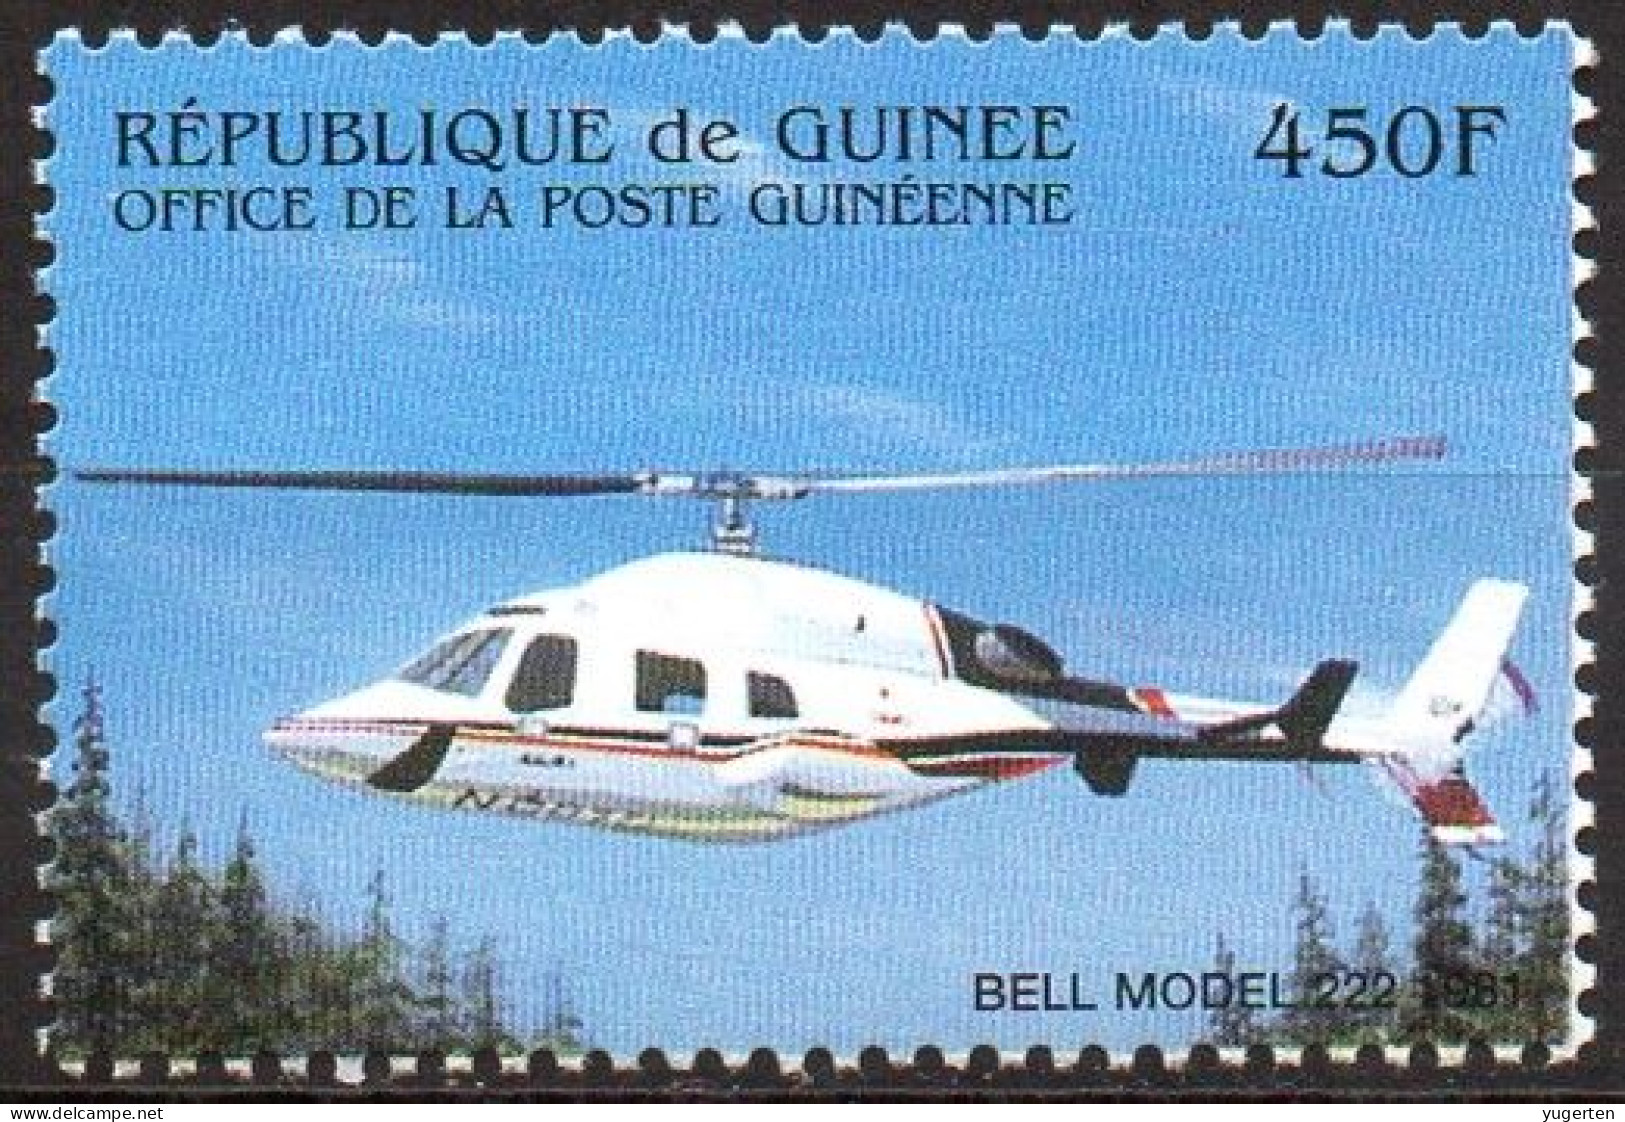 GUINEA - 1v - MNH - Helicopter - Helicopters - Hélicoptères - Hubschrauber Helicópteros Elicotteri Hélicoptère - Hélicoptères